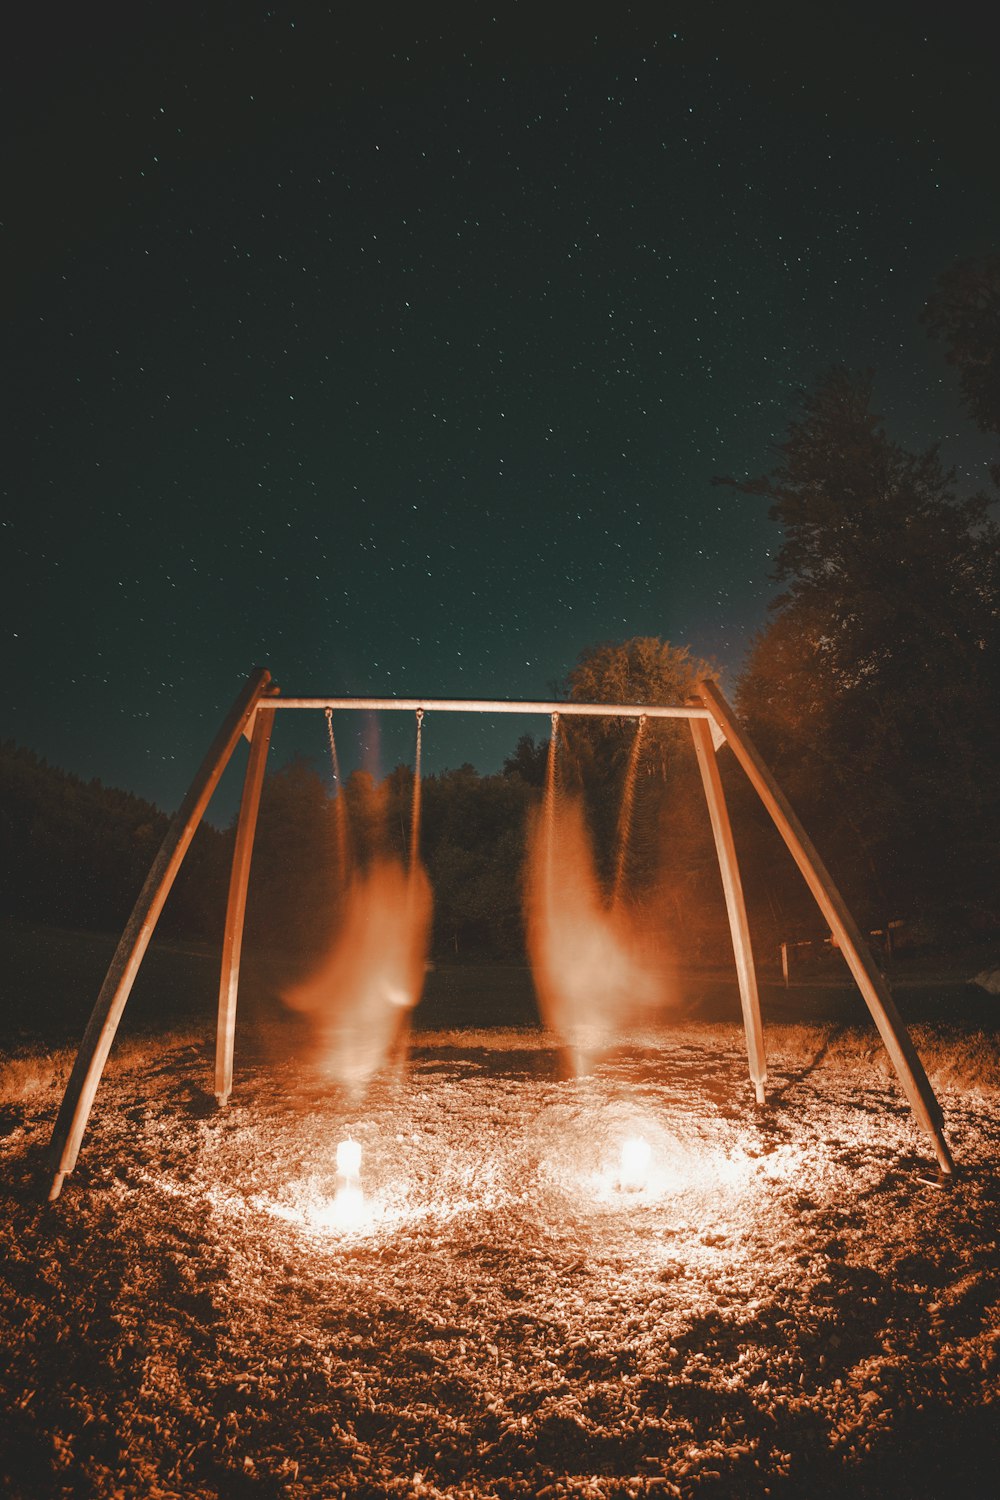 a fire pit in the middle of a field at night